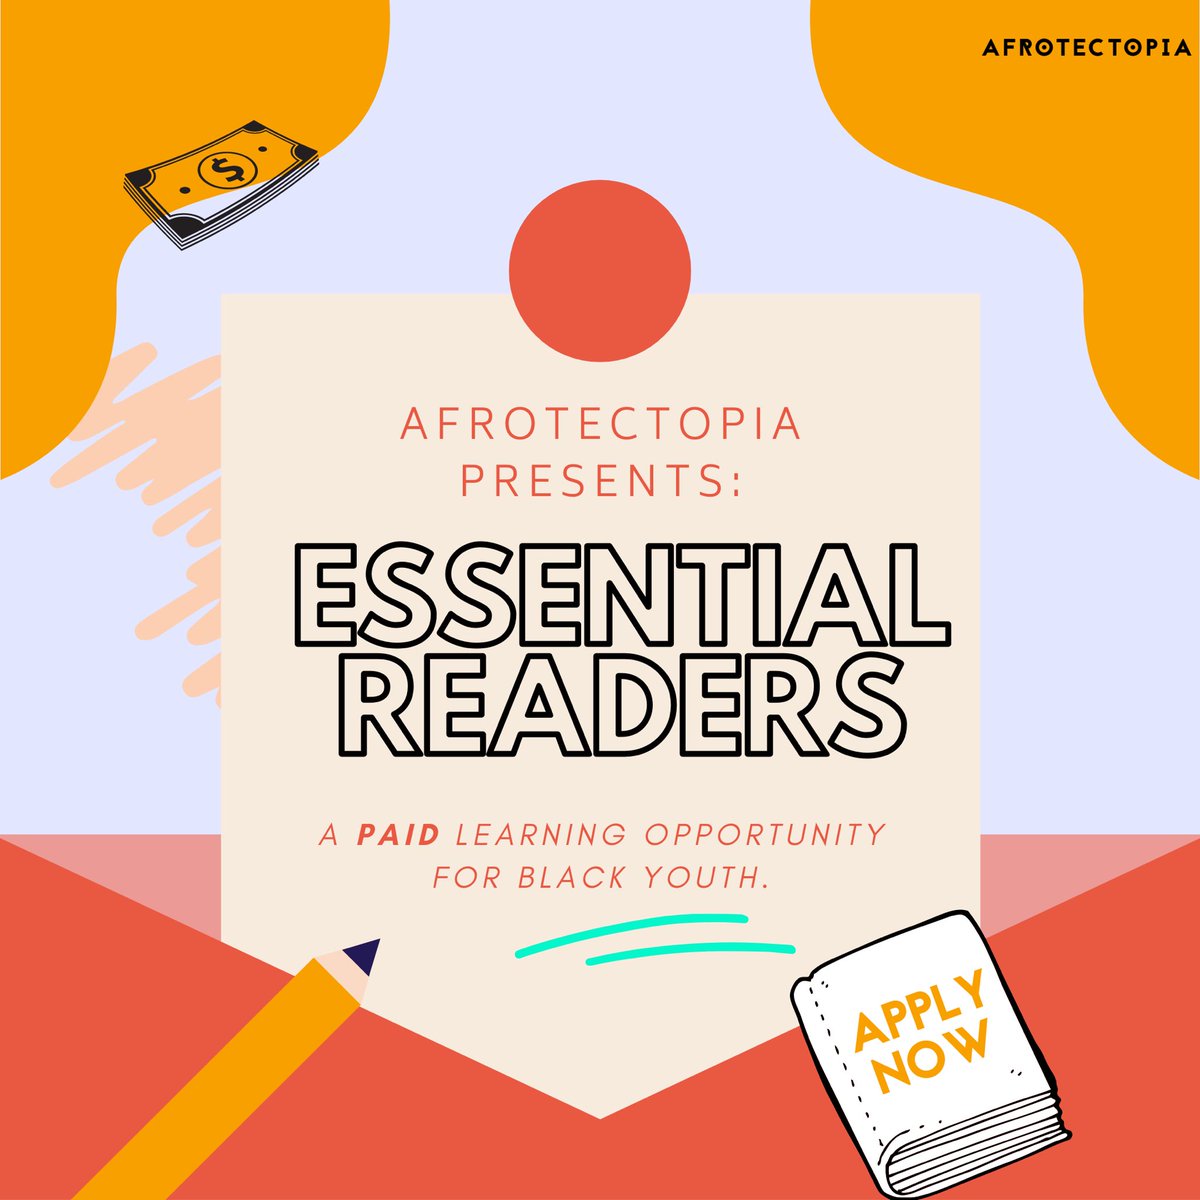 We are invested in the political, social, and racial awareness of Black youth and are excited to launch our initiative, Essential Readers! A paid opportunity for radical learning. Learn more and apply at  https://www.afrotectopia.org/essential-reader